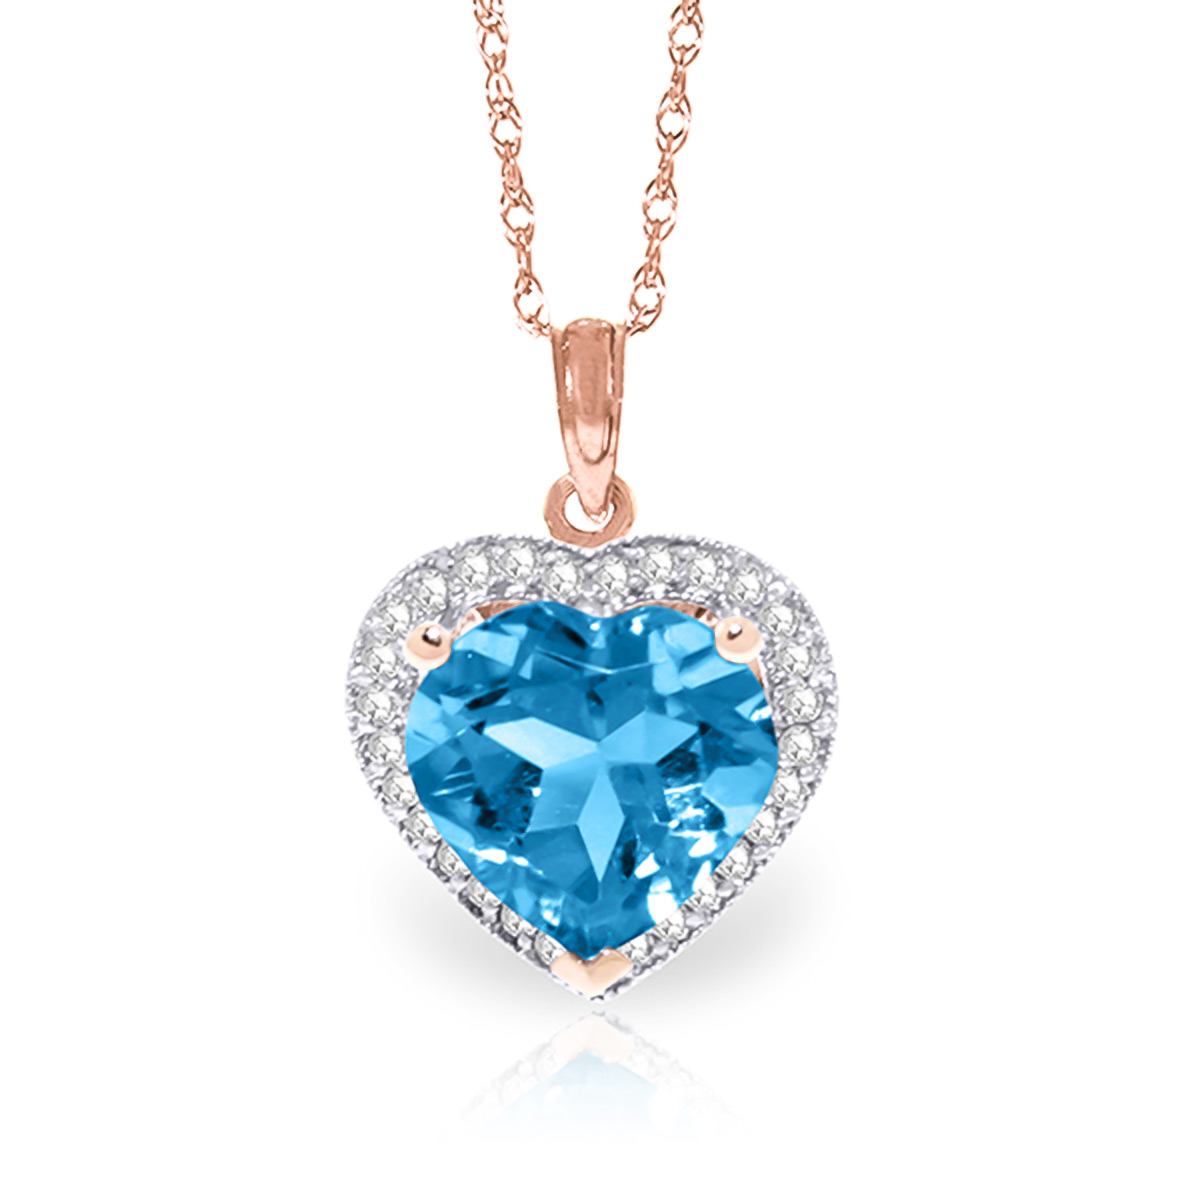 Blue Topaz Halo Pendant Necklace 6.44 ctw in 9ct Rose Gold